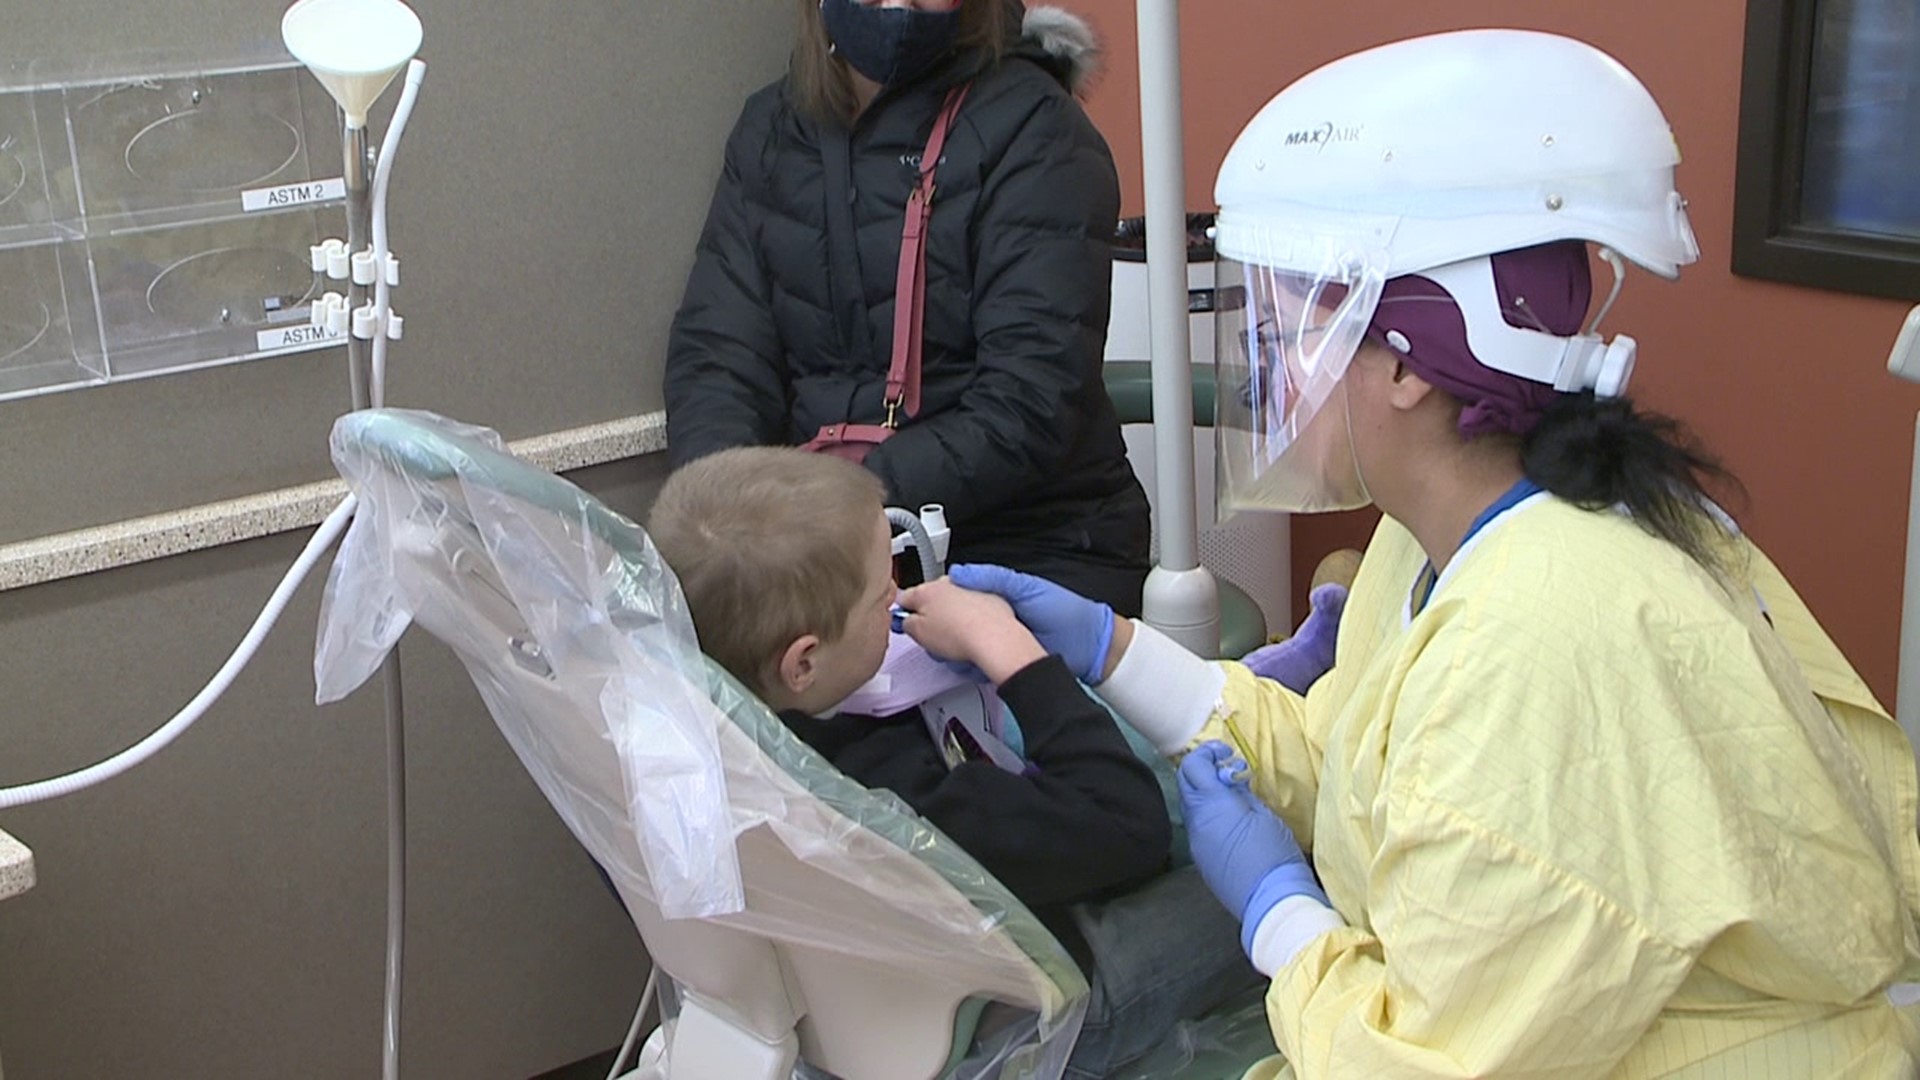 The 'Kids' Cavity Prevention Day' was held at LCCC in Nanticoke from 10 a.m. to 1 p.m. Saturday.